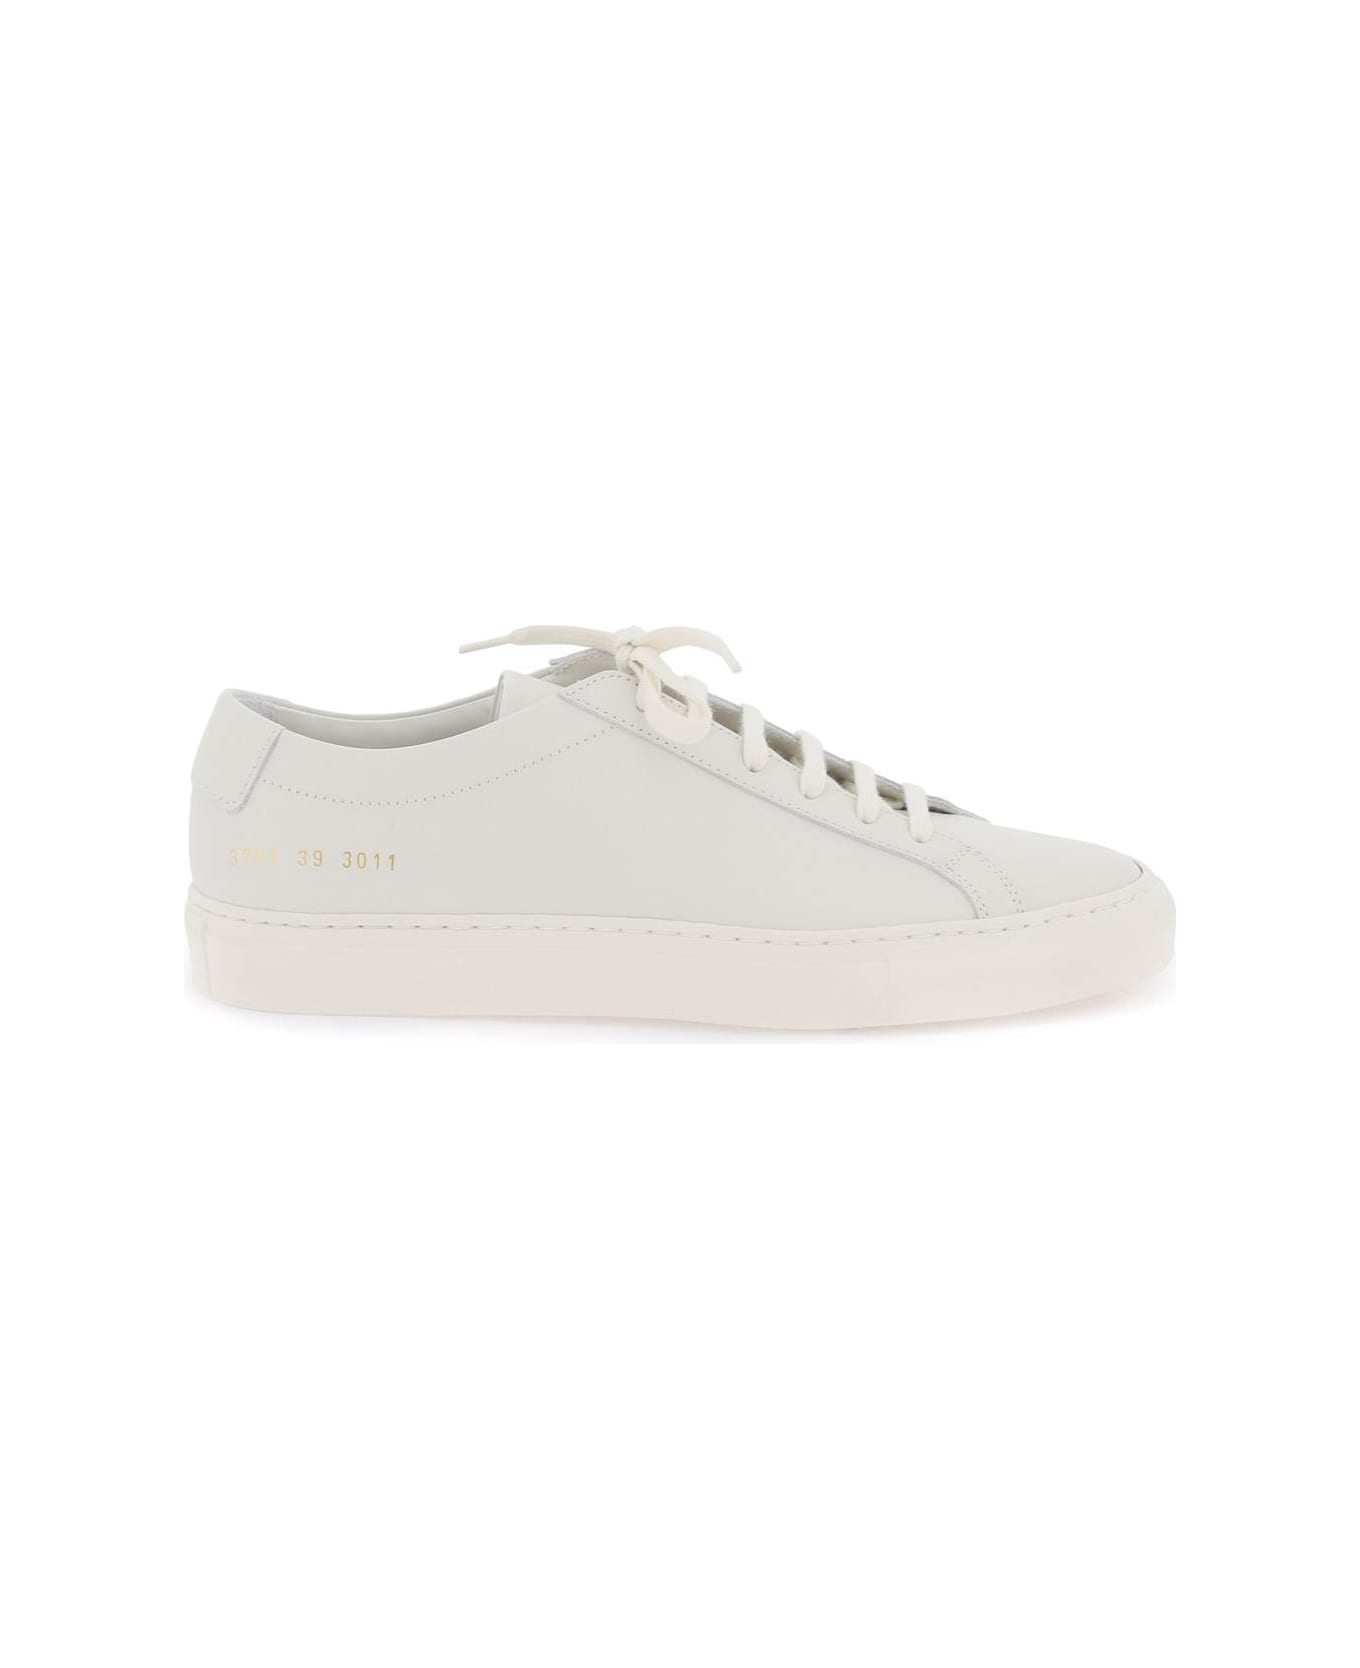 Common Projects Original Achilles Leather Sneakers - Warm white